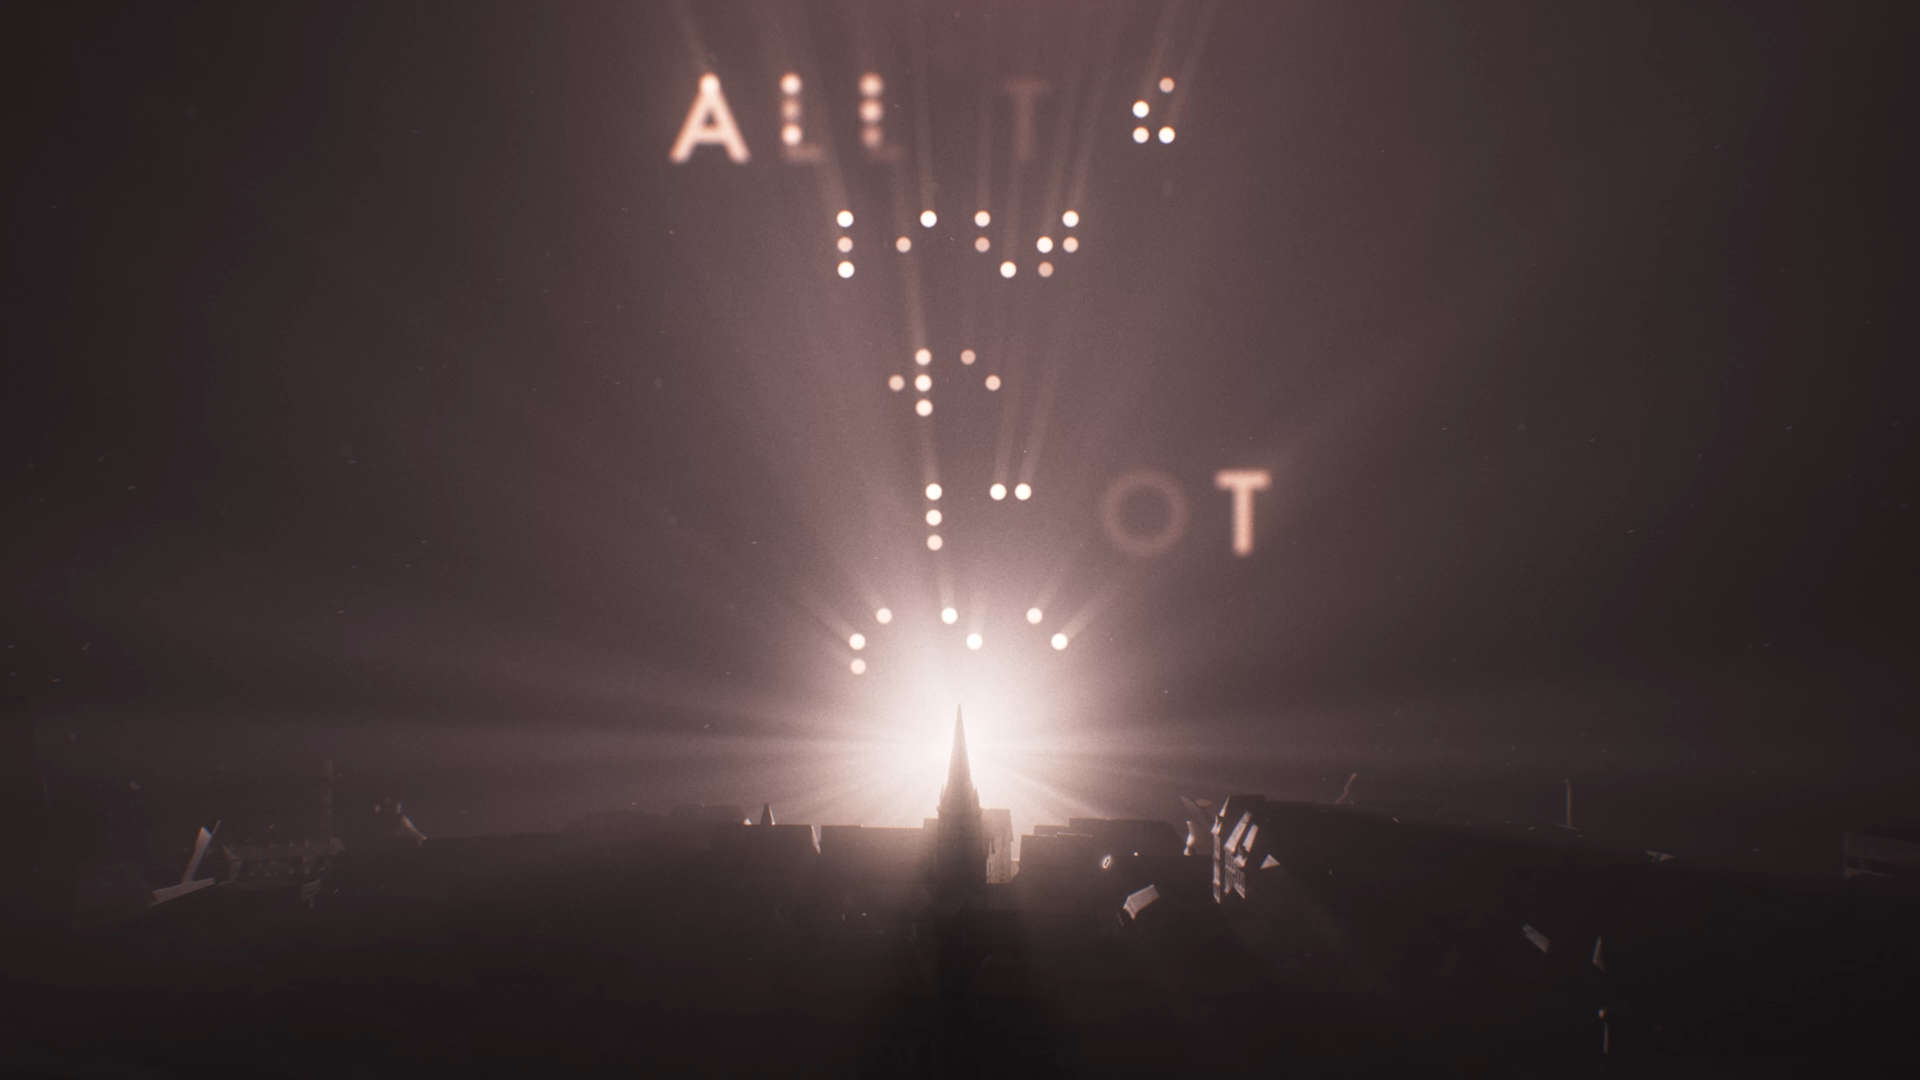 all_the_light_we_cannot_see_-_main_title-Original.00_01_17_13.Still022